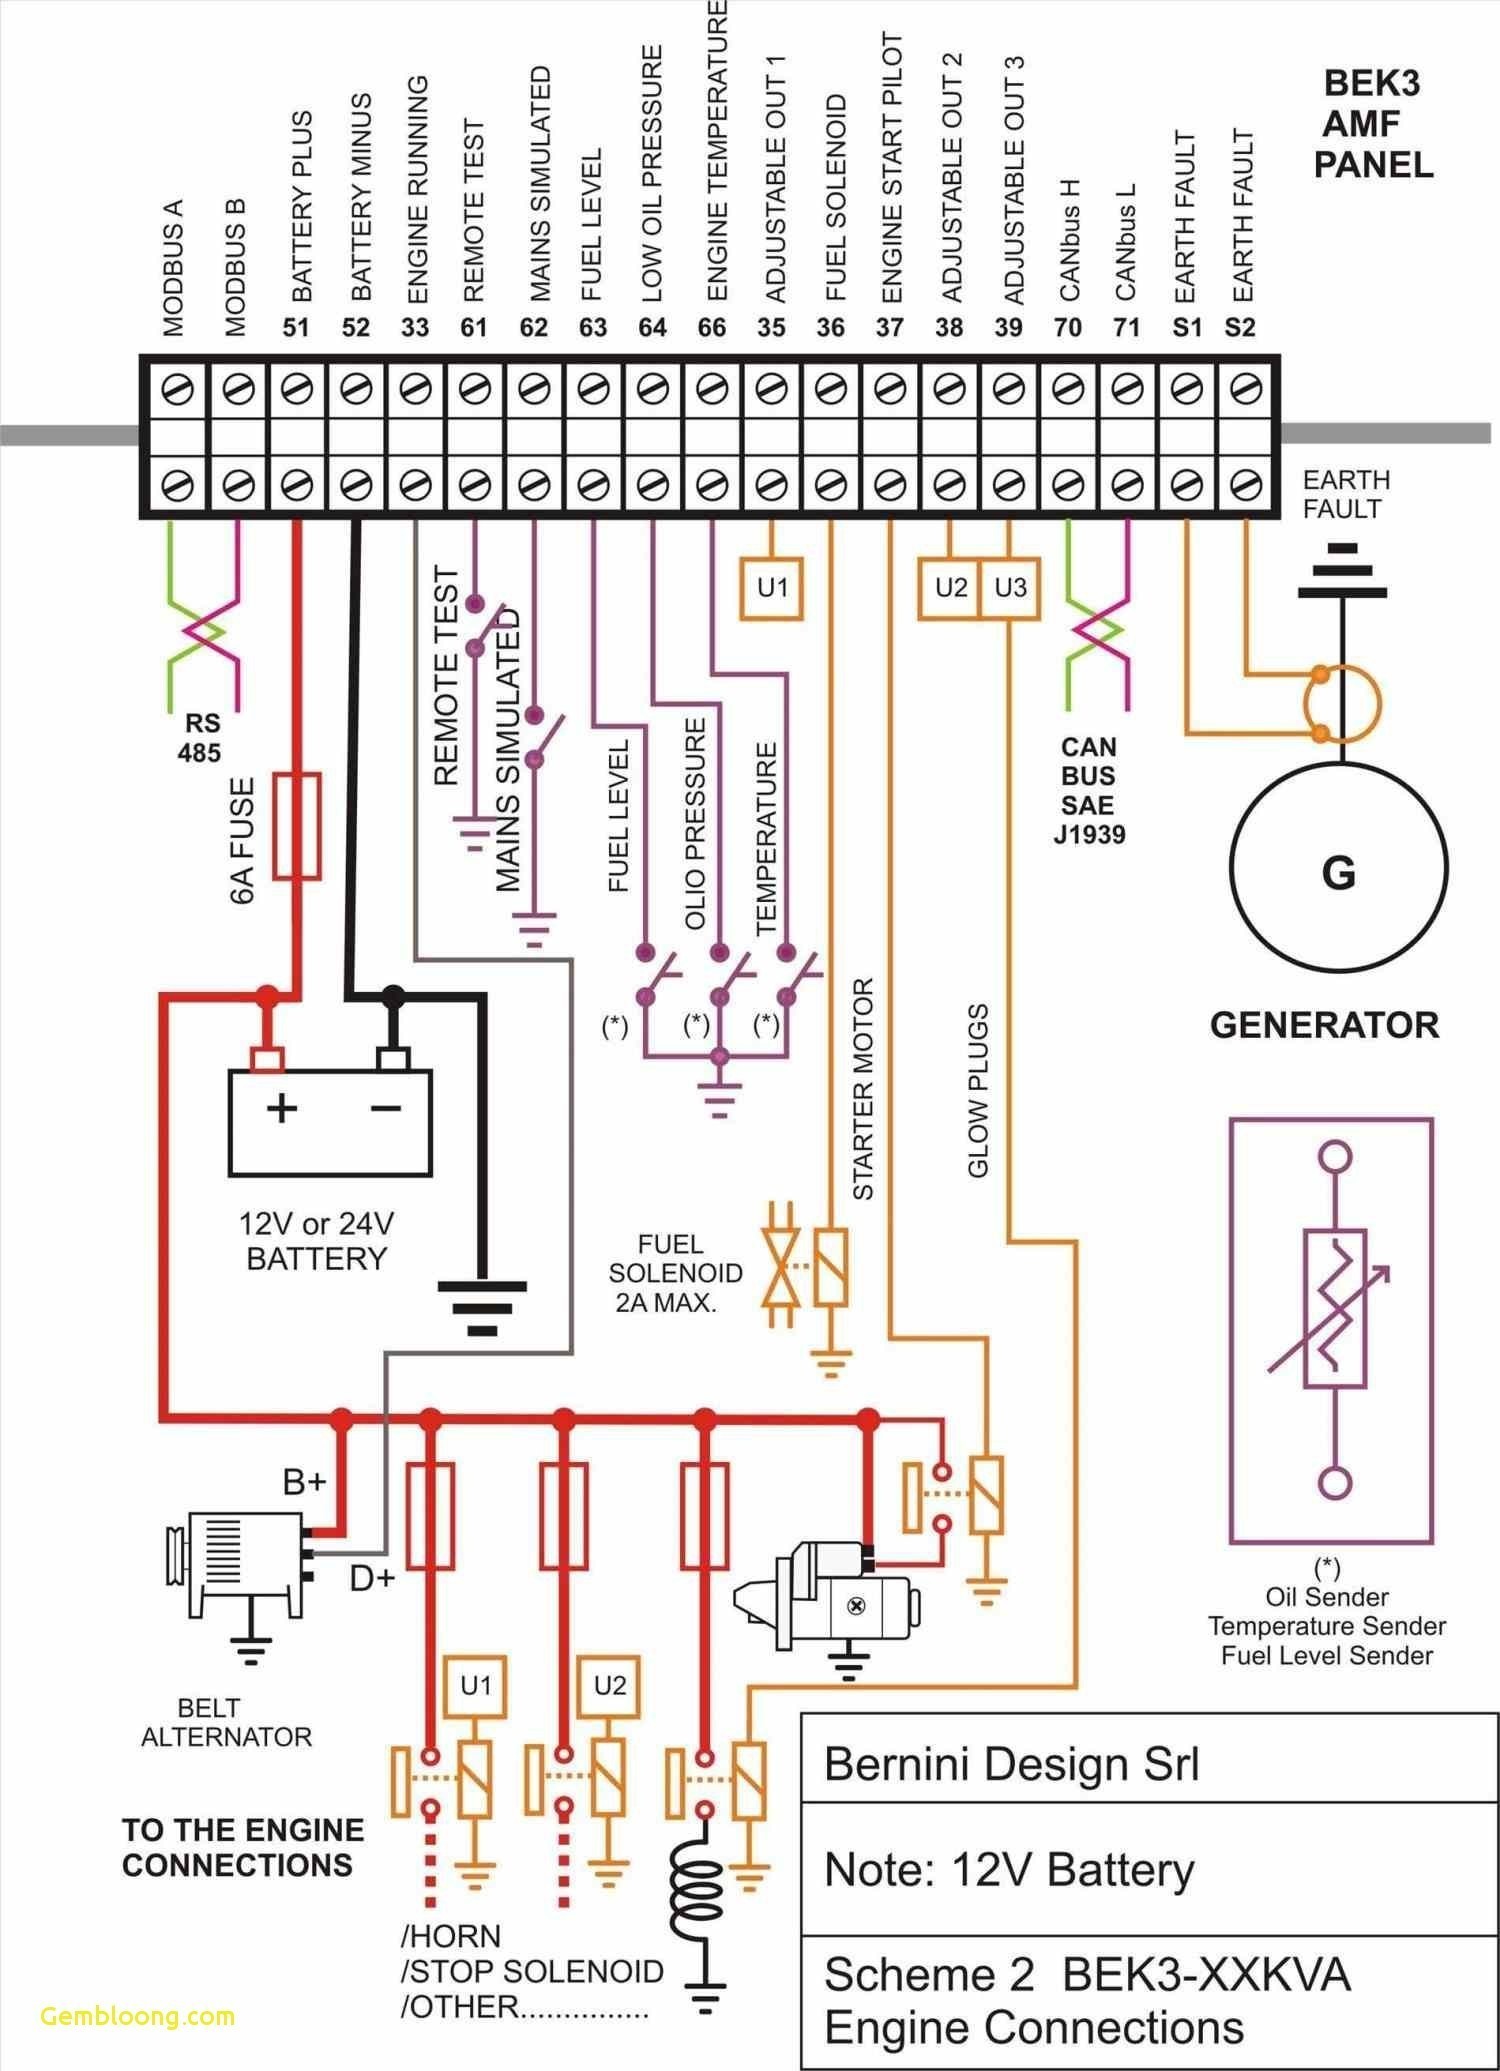 Wiring Diagram For Lennox Gas Furnace Inspirationa Outstanding Sketch Electrical